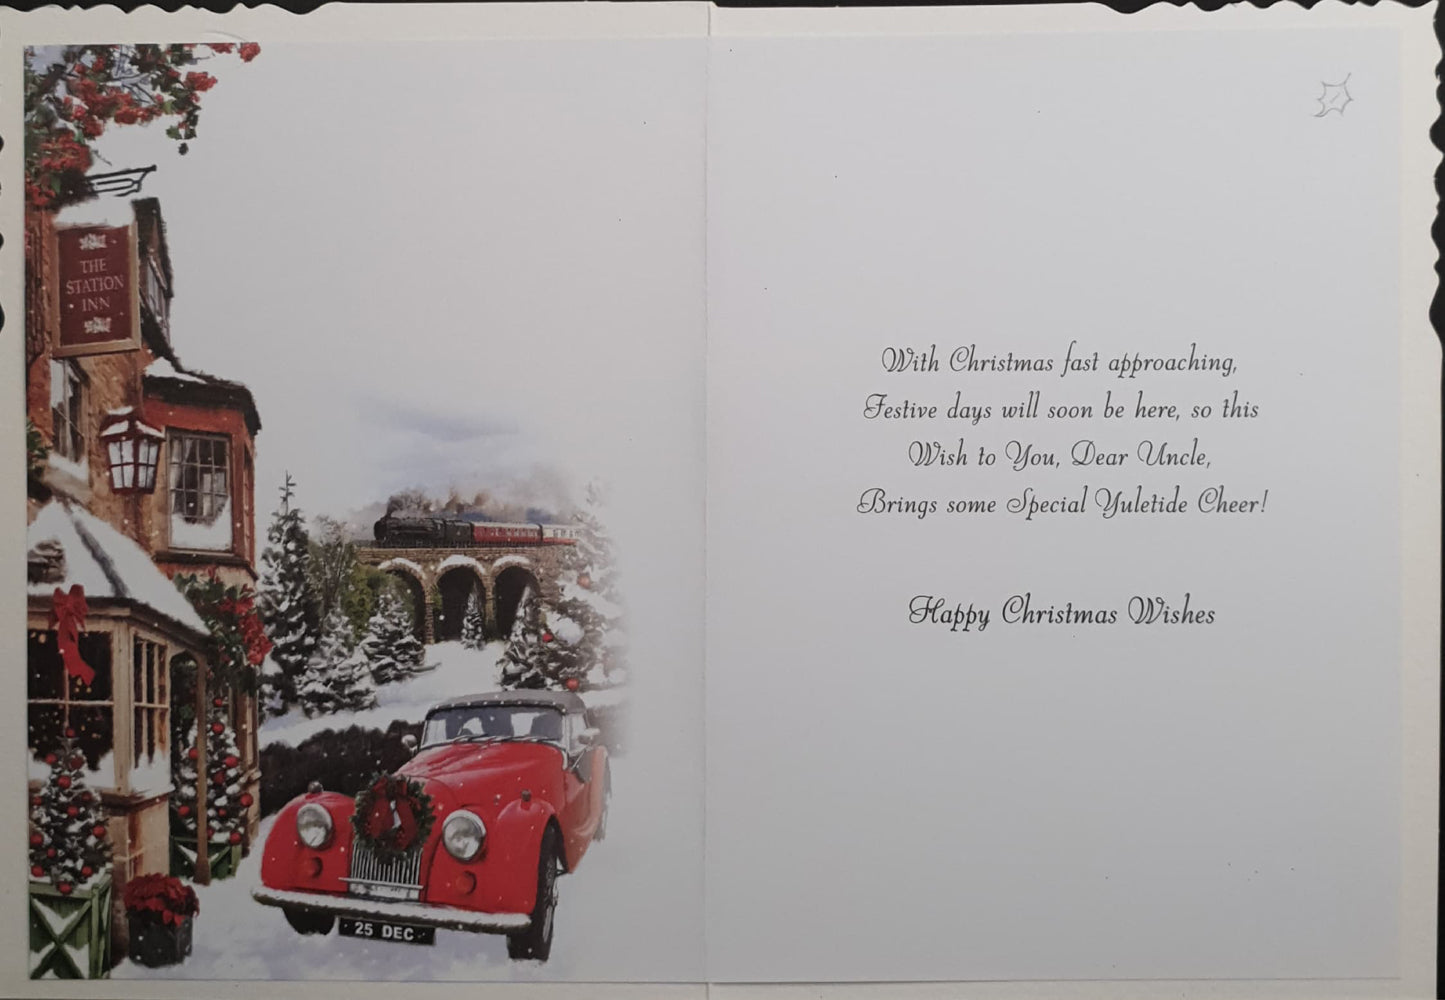 Uncle Christmas Card - Classic Red Car in Snow Beside Cosy Building